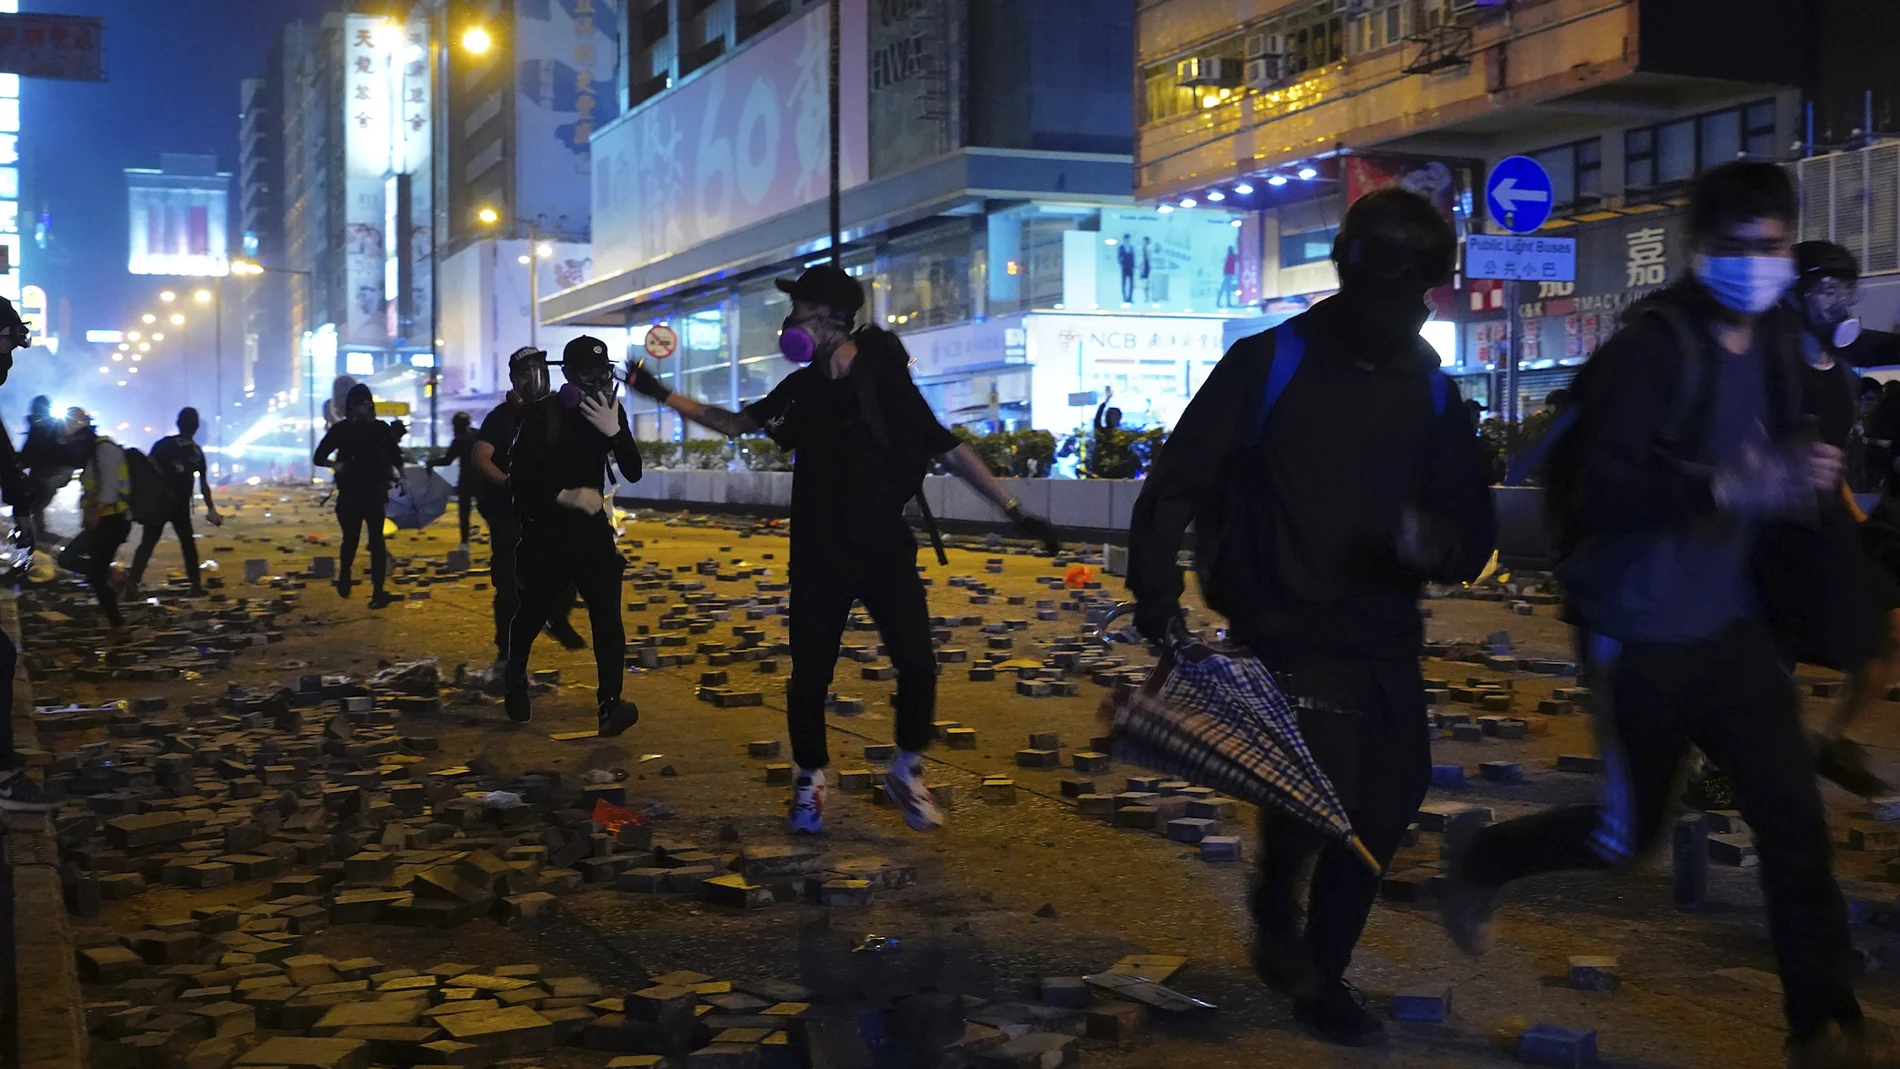 Protesters run along a street in the Kowloon area of Hong Kong, Monday, Nov. 18, 2019. As night fell in Hong Kong, police tightened a siege Monday at a university campus as hundreds of anti-government protesters trapped inside sought to escape. (AP Photo/Vincent Yu)